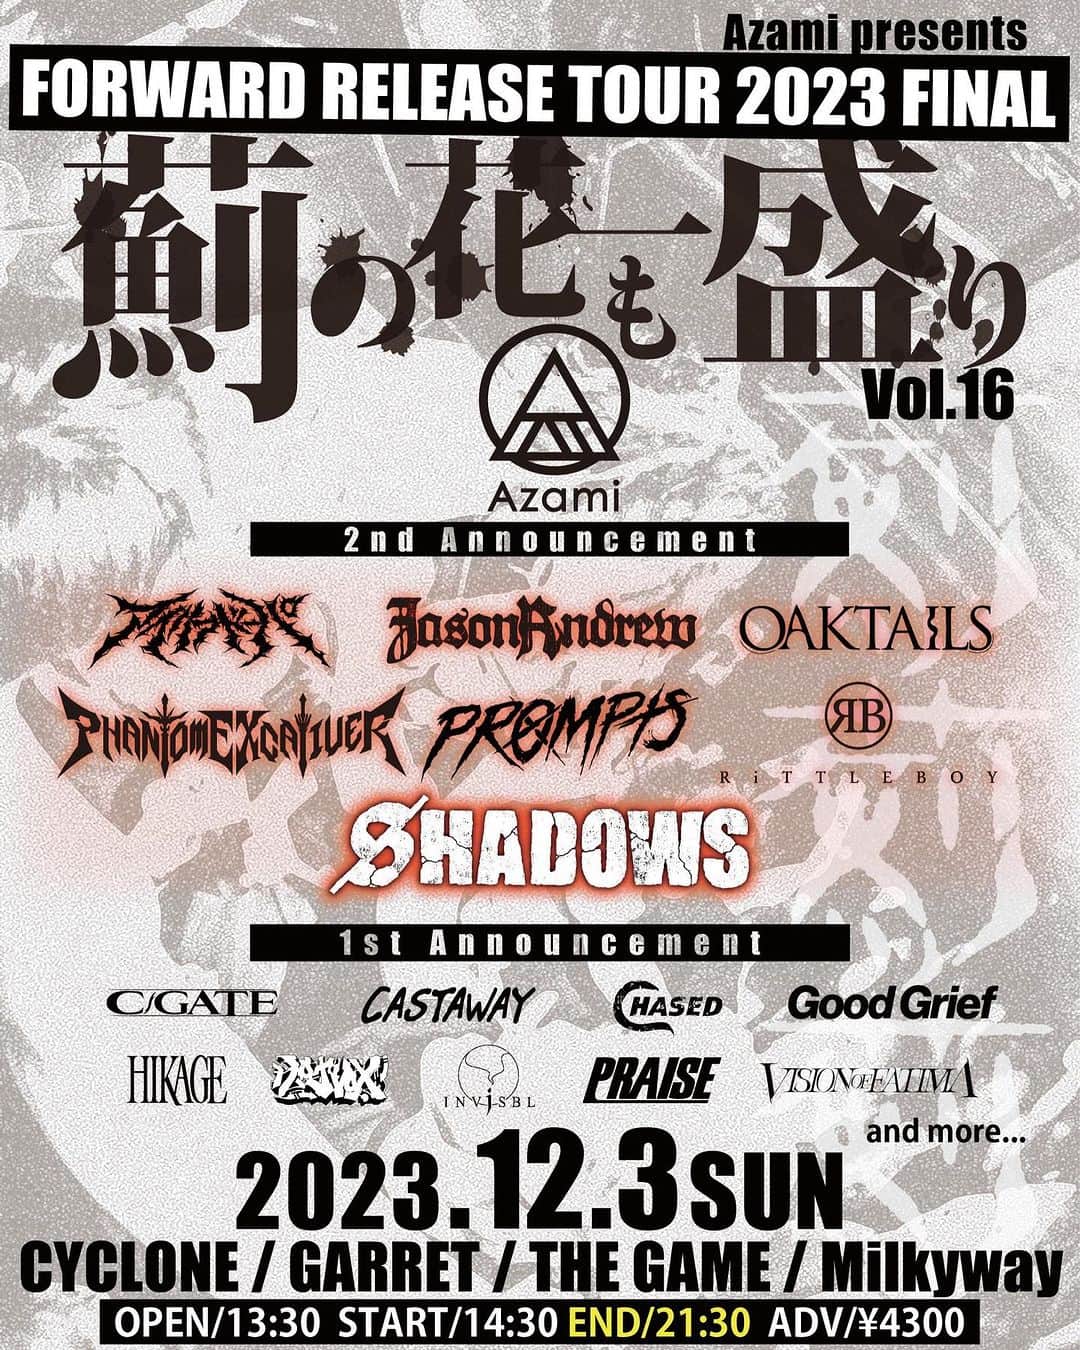 SHADOWSのインスタグラム：「【新規公演】 Azami pre. FORWARD Release Tour2023 "薊の花も一盛り vol.16"出演決定！  日程: 2023.12.03(Sun) 会場: 渋谷4会場サーキット  Open / 13:30 Start / 14:30 ※END 21:30予定 TICKET ADV ¥4300+Drink  TICKETS: e＋ https://eplus.jp/sf/detail/3974460001-P0030001  LIVEPocket http://t.livepocket.jp/e/azami1203」